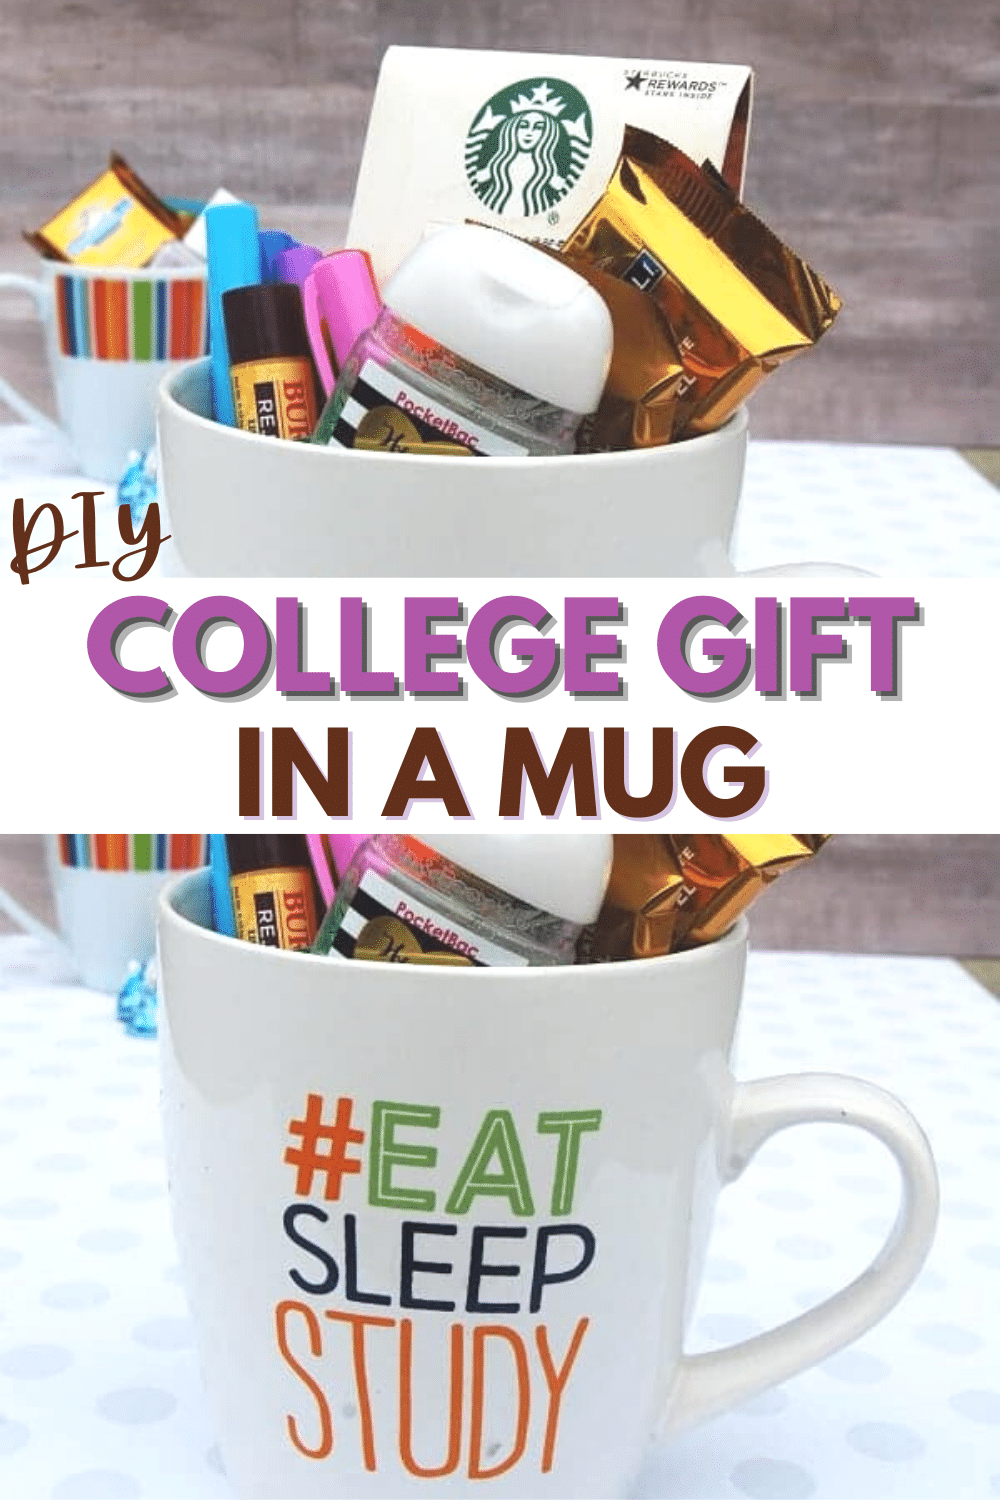 This college gift in a mug is a fun and easy gift idea for any college student. Perfect for encouragement during finals week or any time as a simple treat. #college #collegegift #giftidea #collegestudent via @wondermomwannab